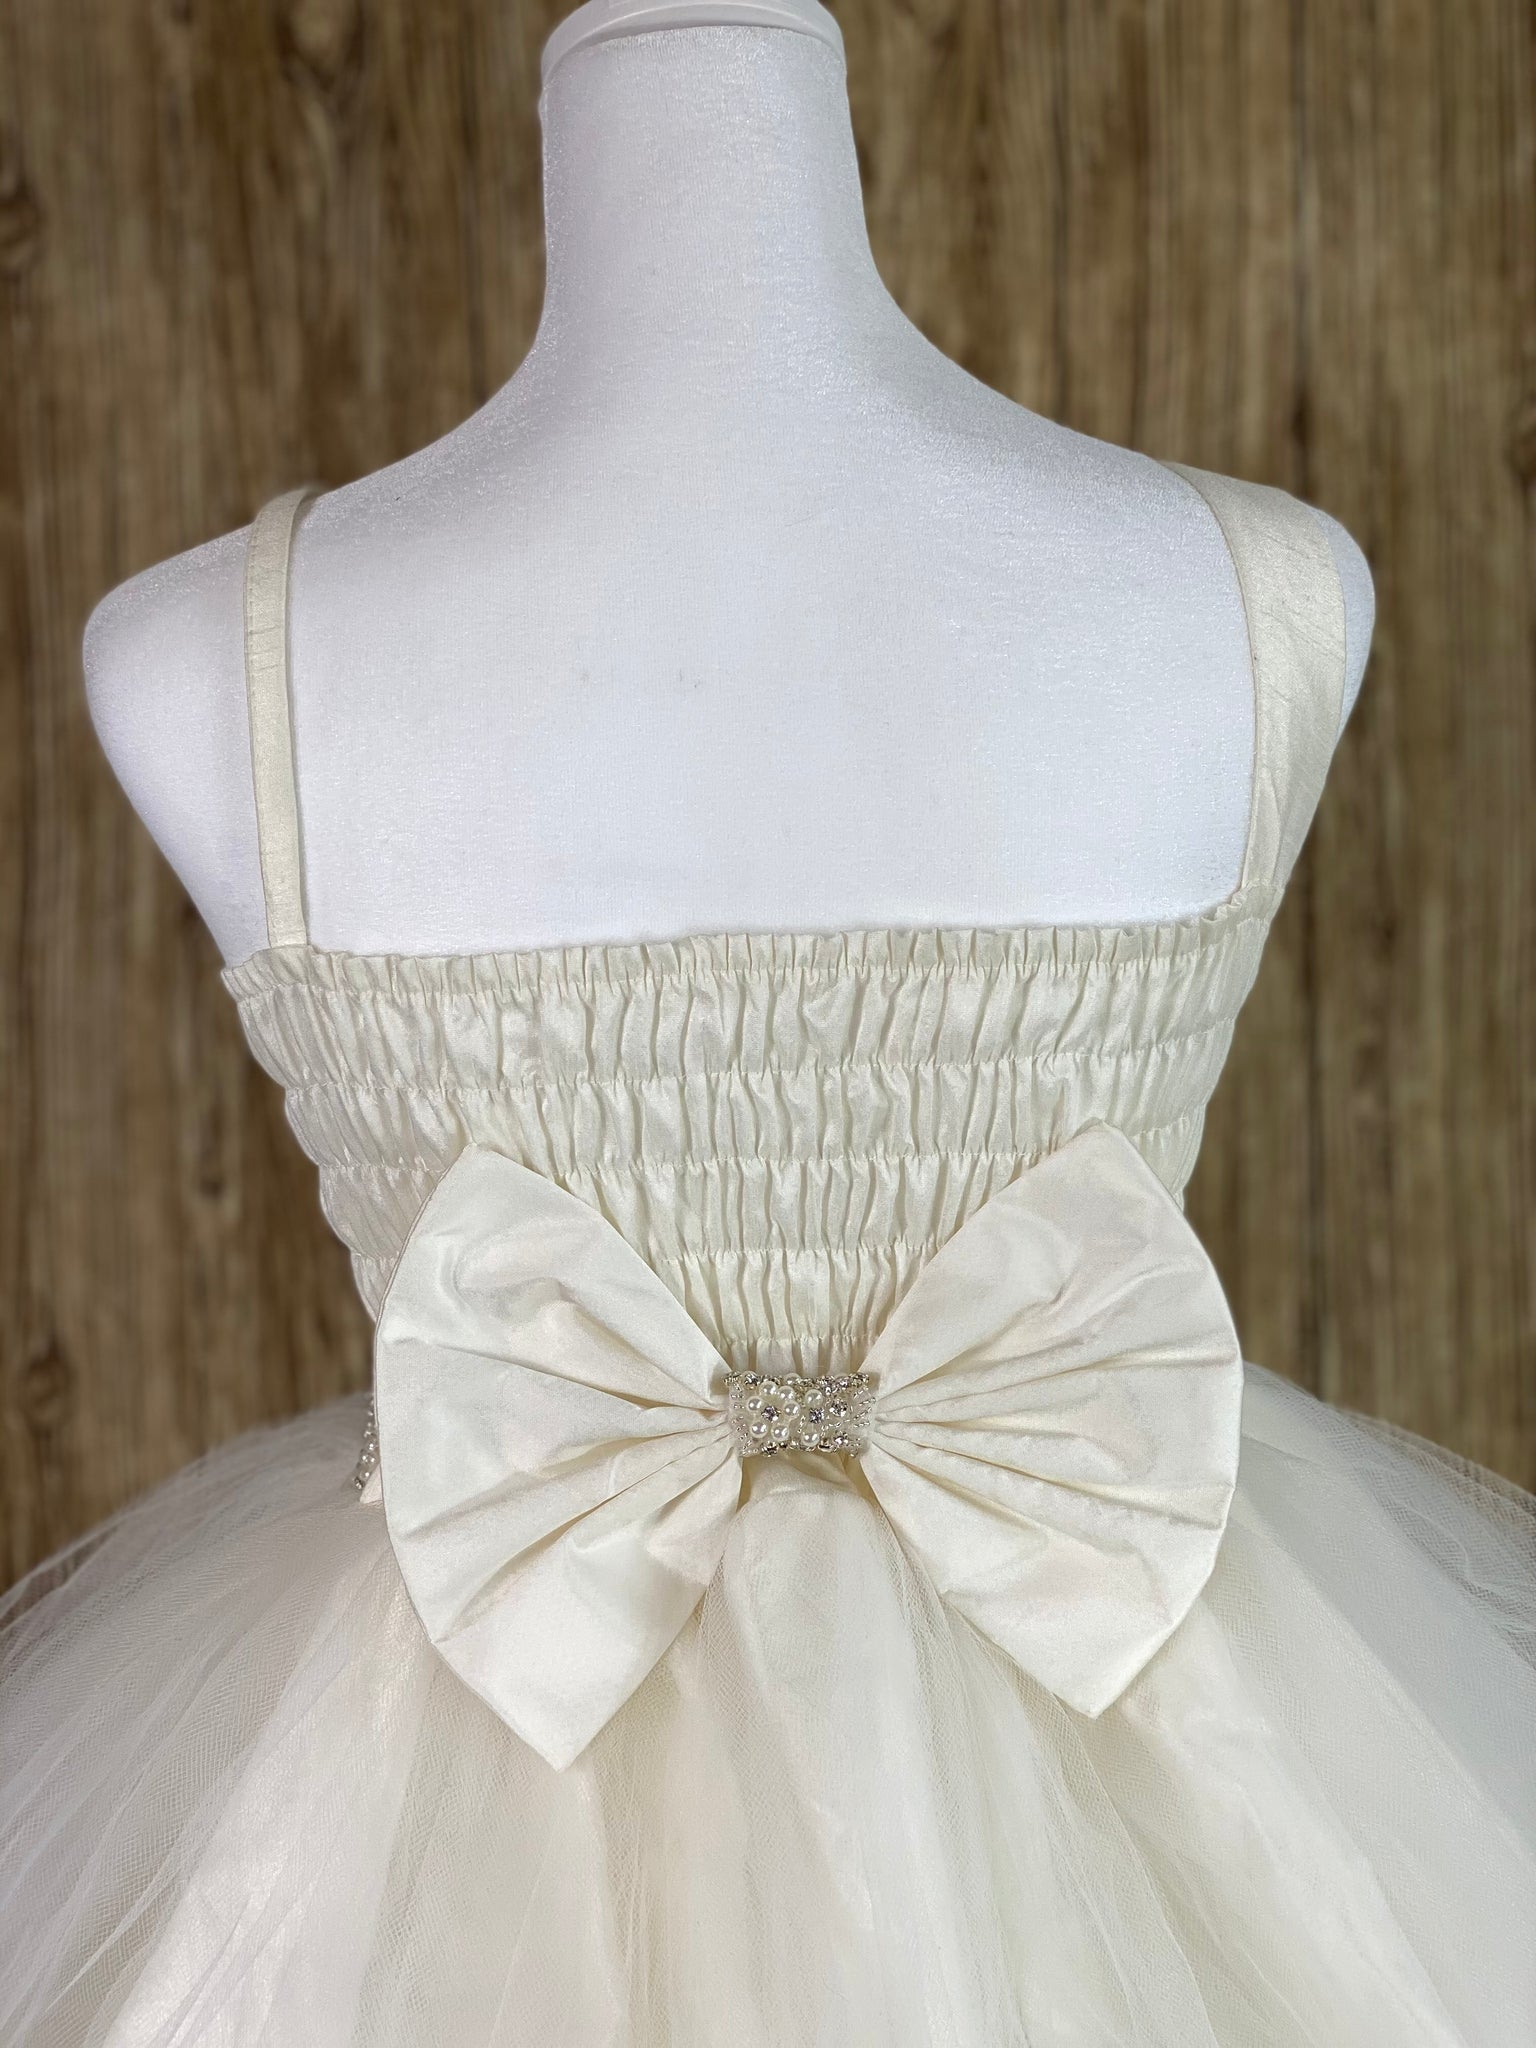 Ivory, size 12 Satin bodice with beaded lace overlay Flower on shoulder Rhinestone and pearl band along waist Gathered tulle skirt Shirred back Large satin bow in back